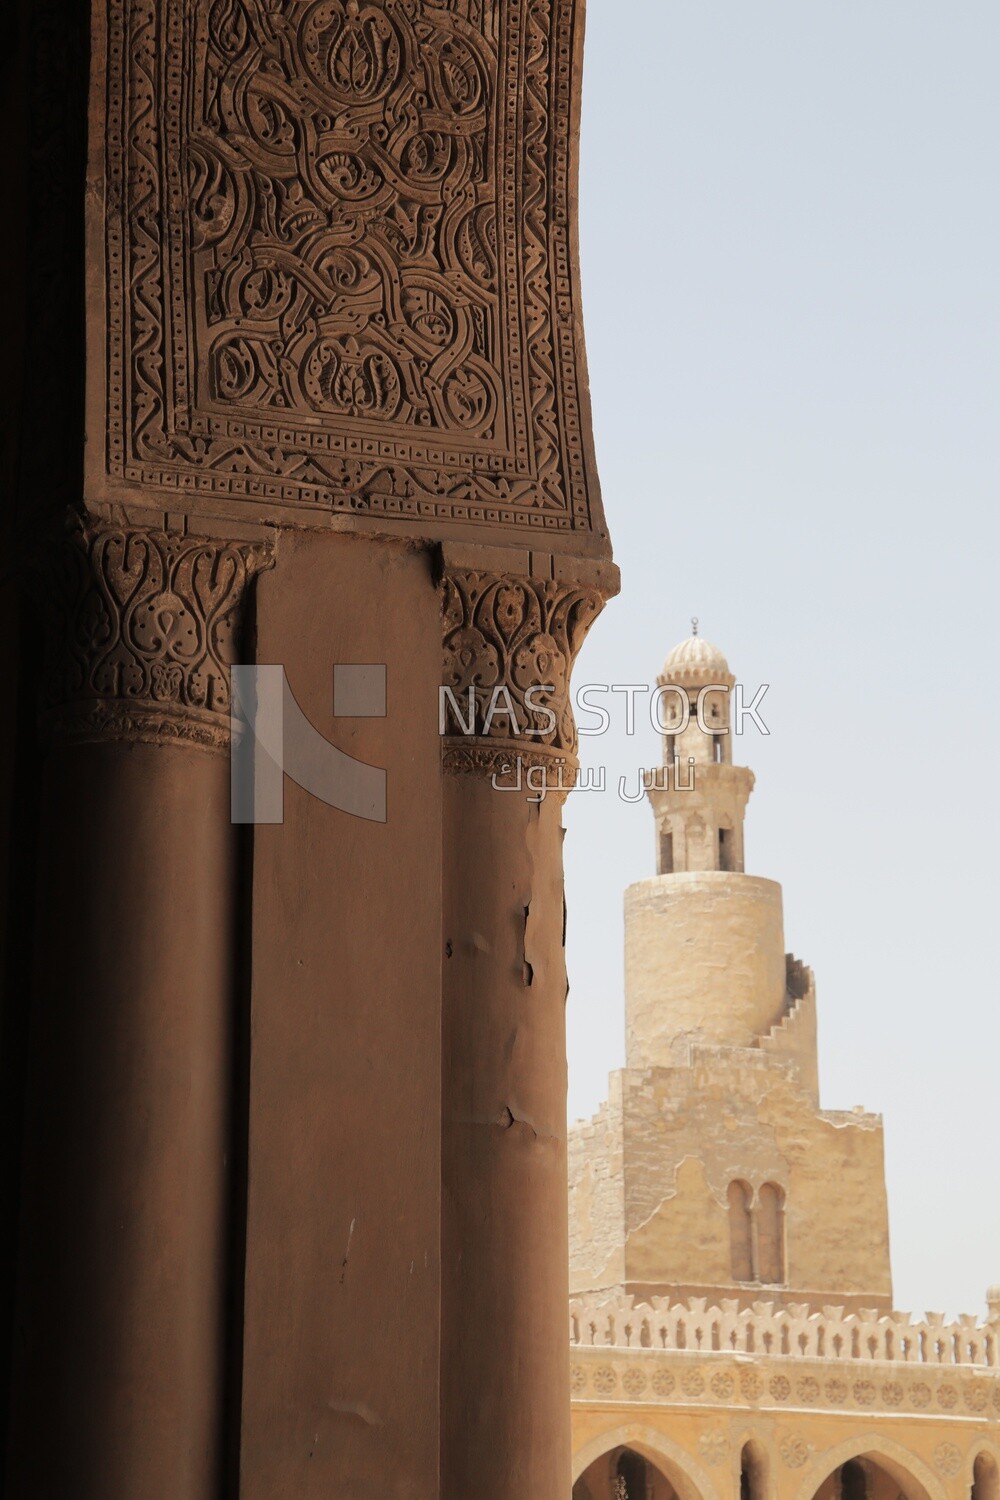 Arches of Ahmad ibn tulun mosque in Cairo, Tourism in Egypt, Famous landmarks in Egypt